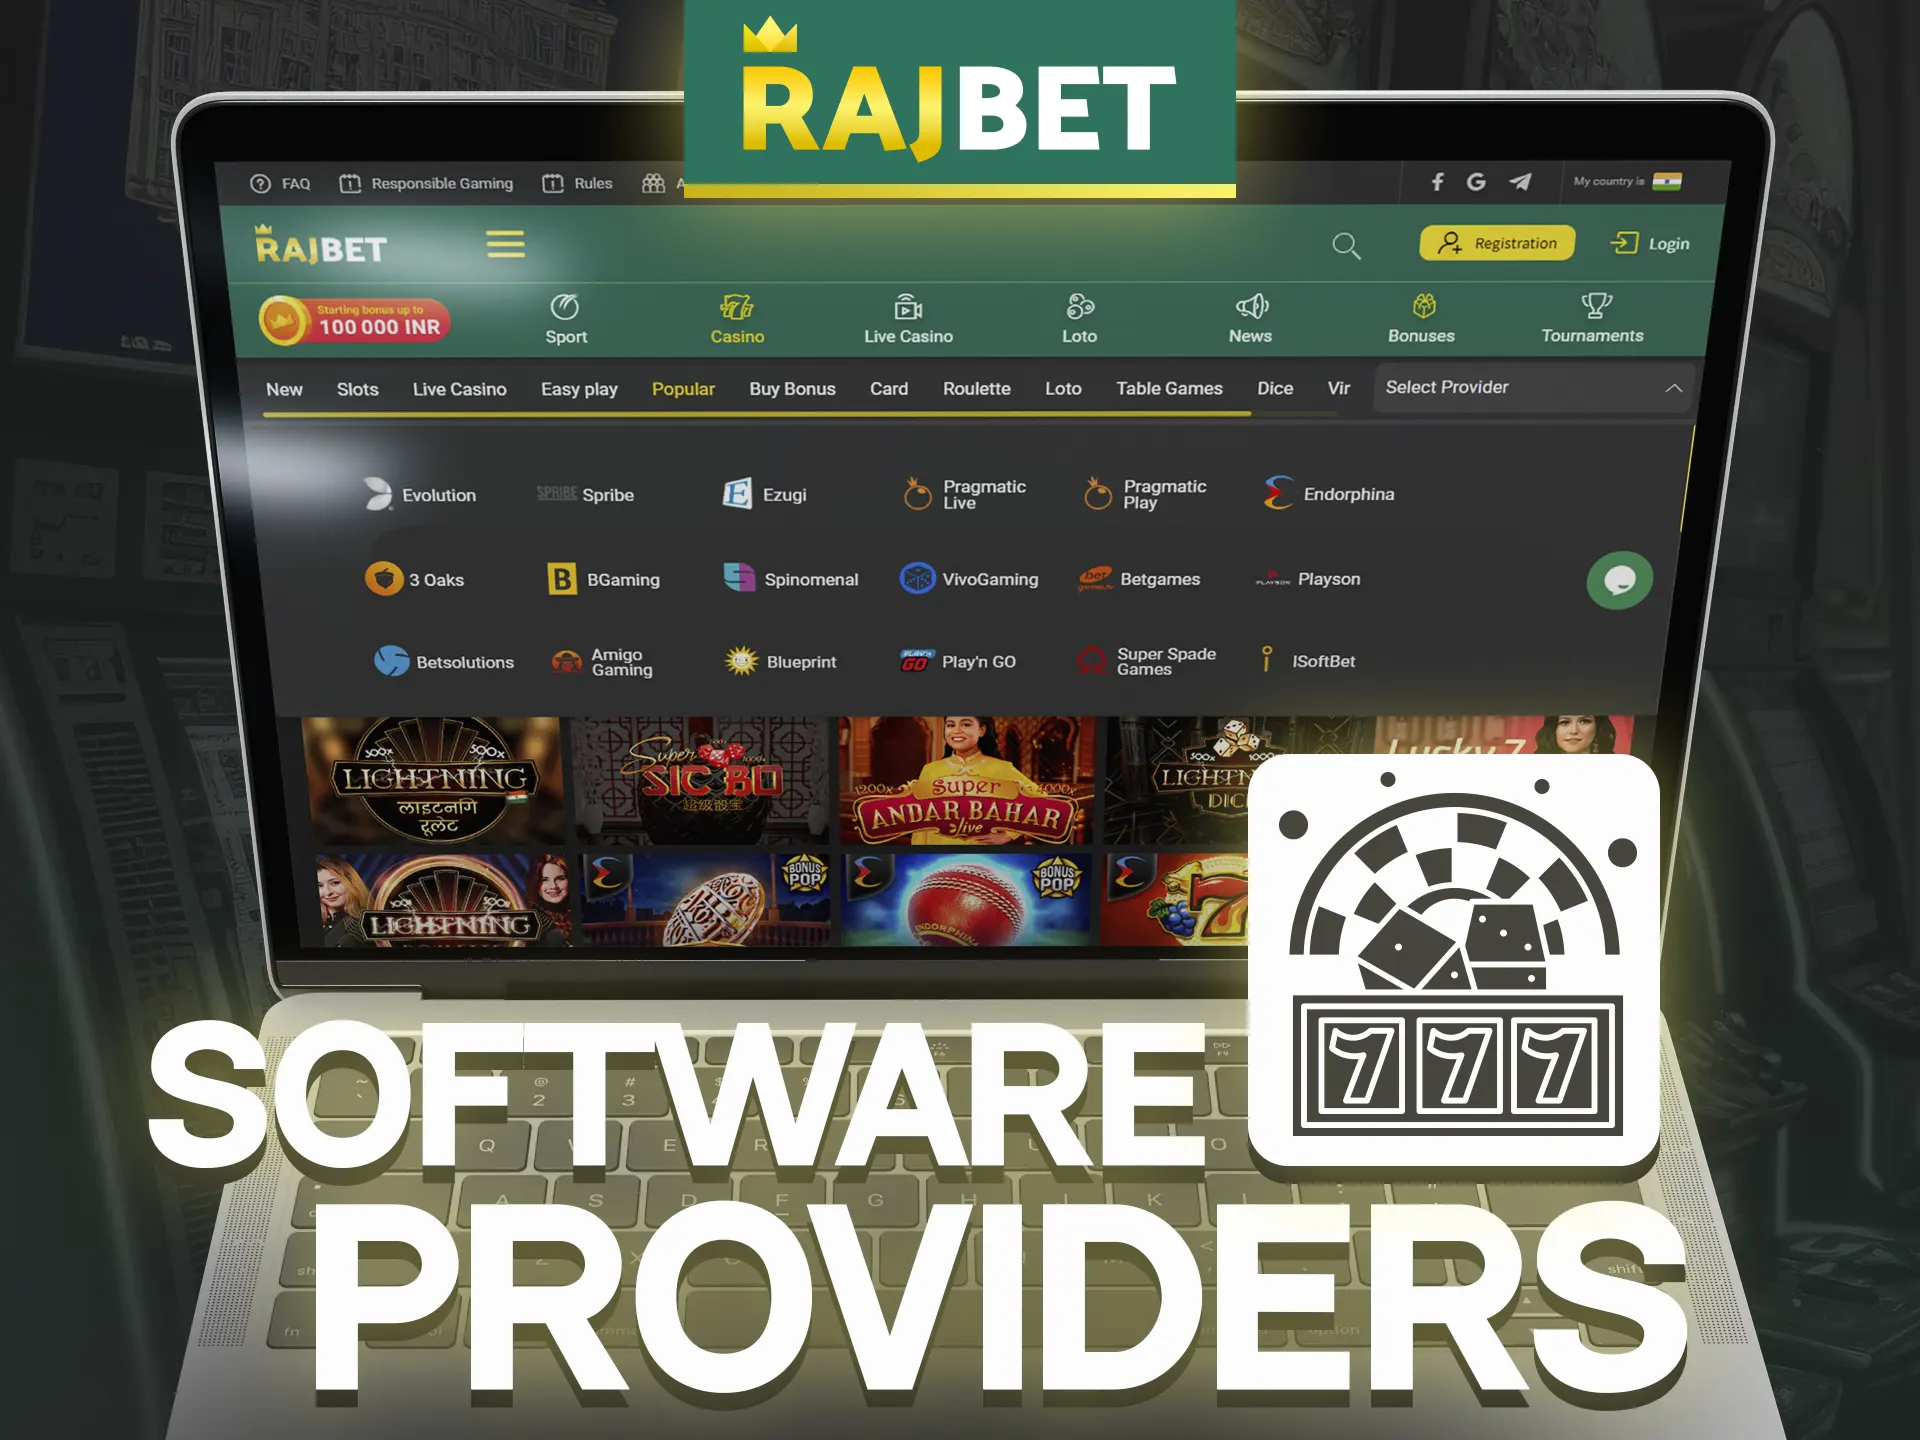 At Rajbet Casino, you can play games from the most popular gambling providers.